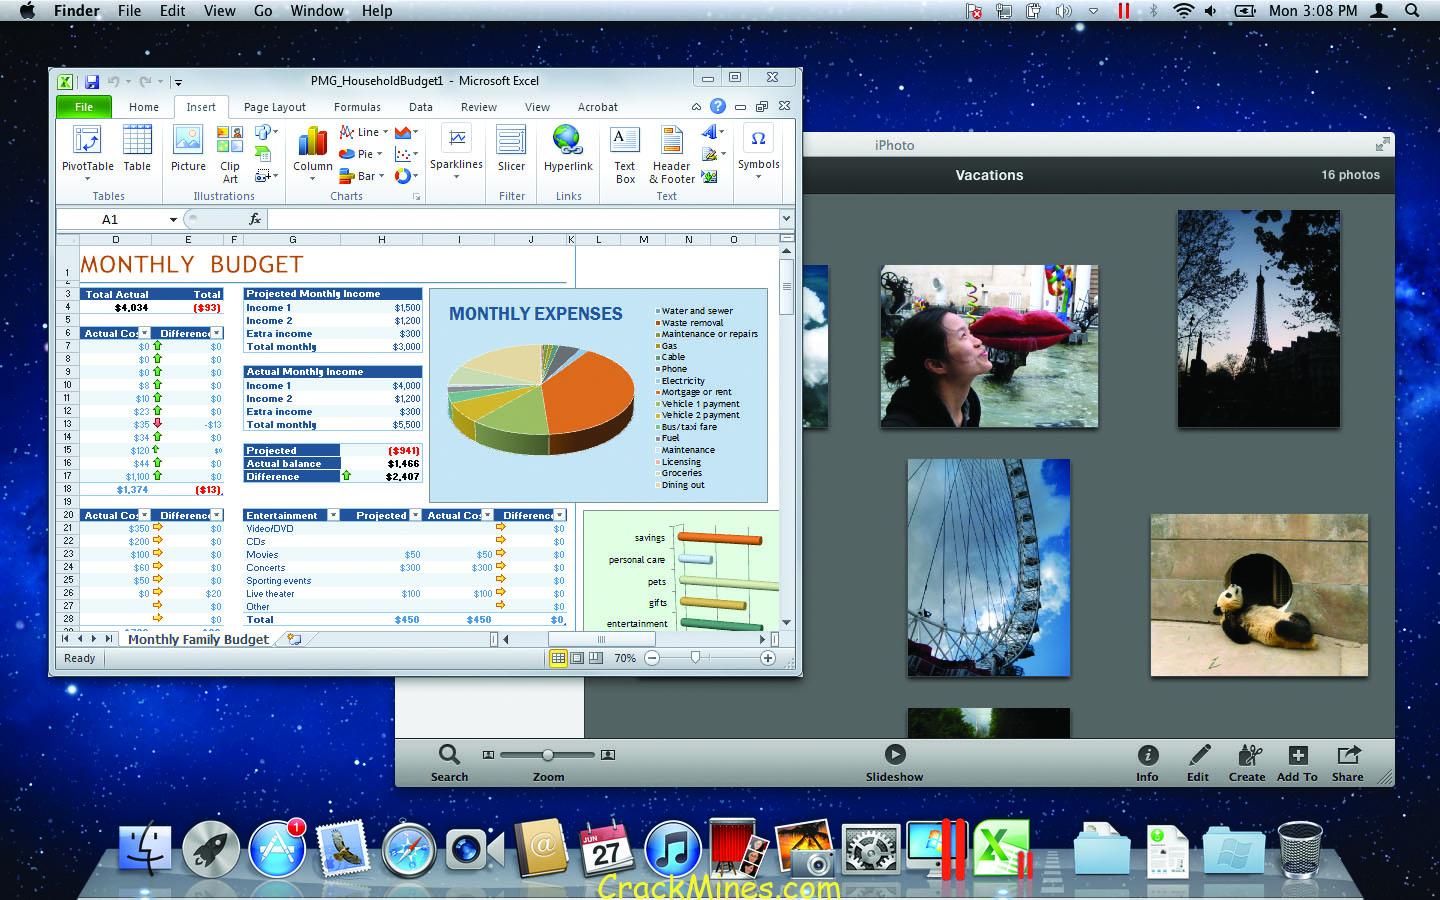 parallels 13 for mac activation key